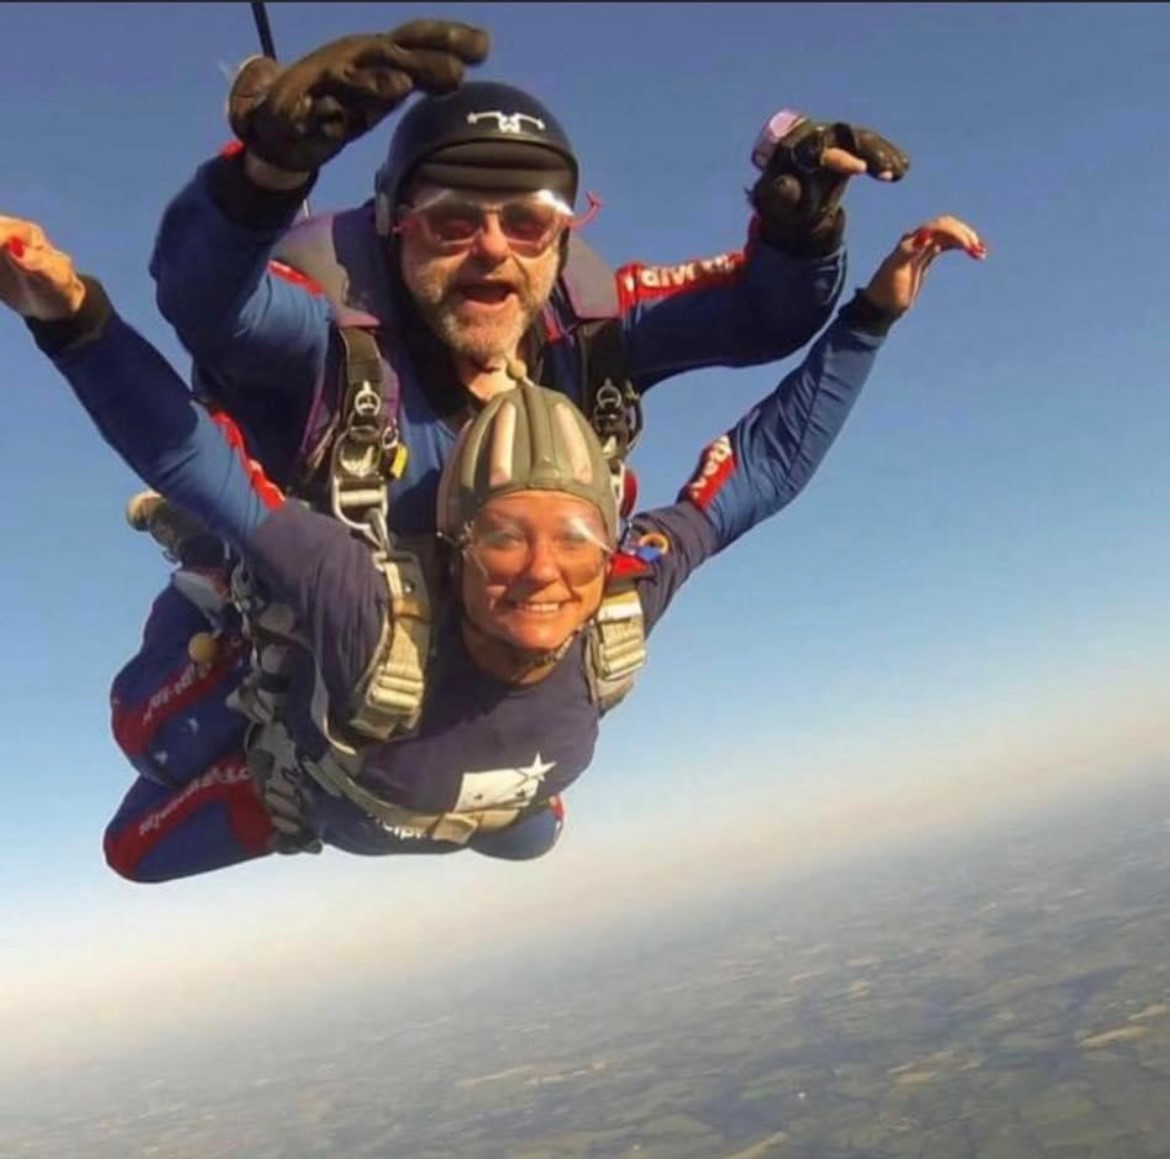 Image for Daredevil fundraising skydive on the horizon